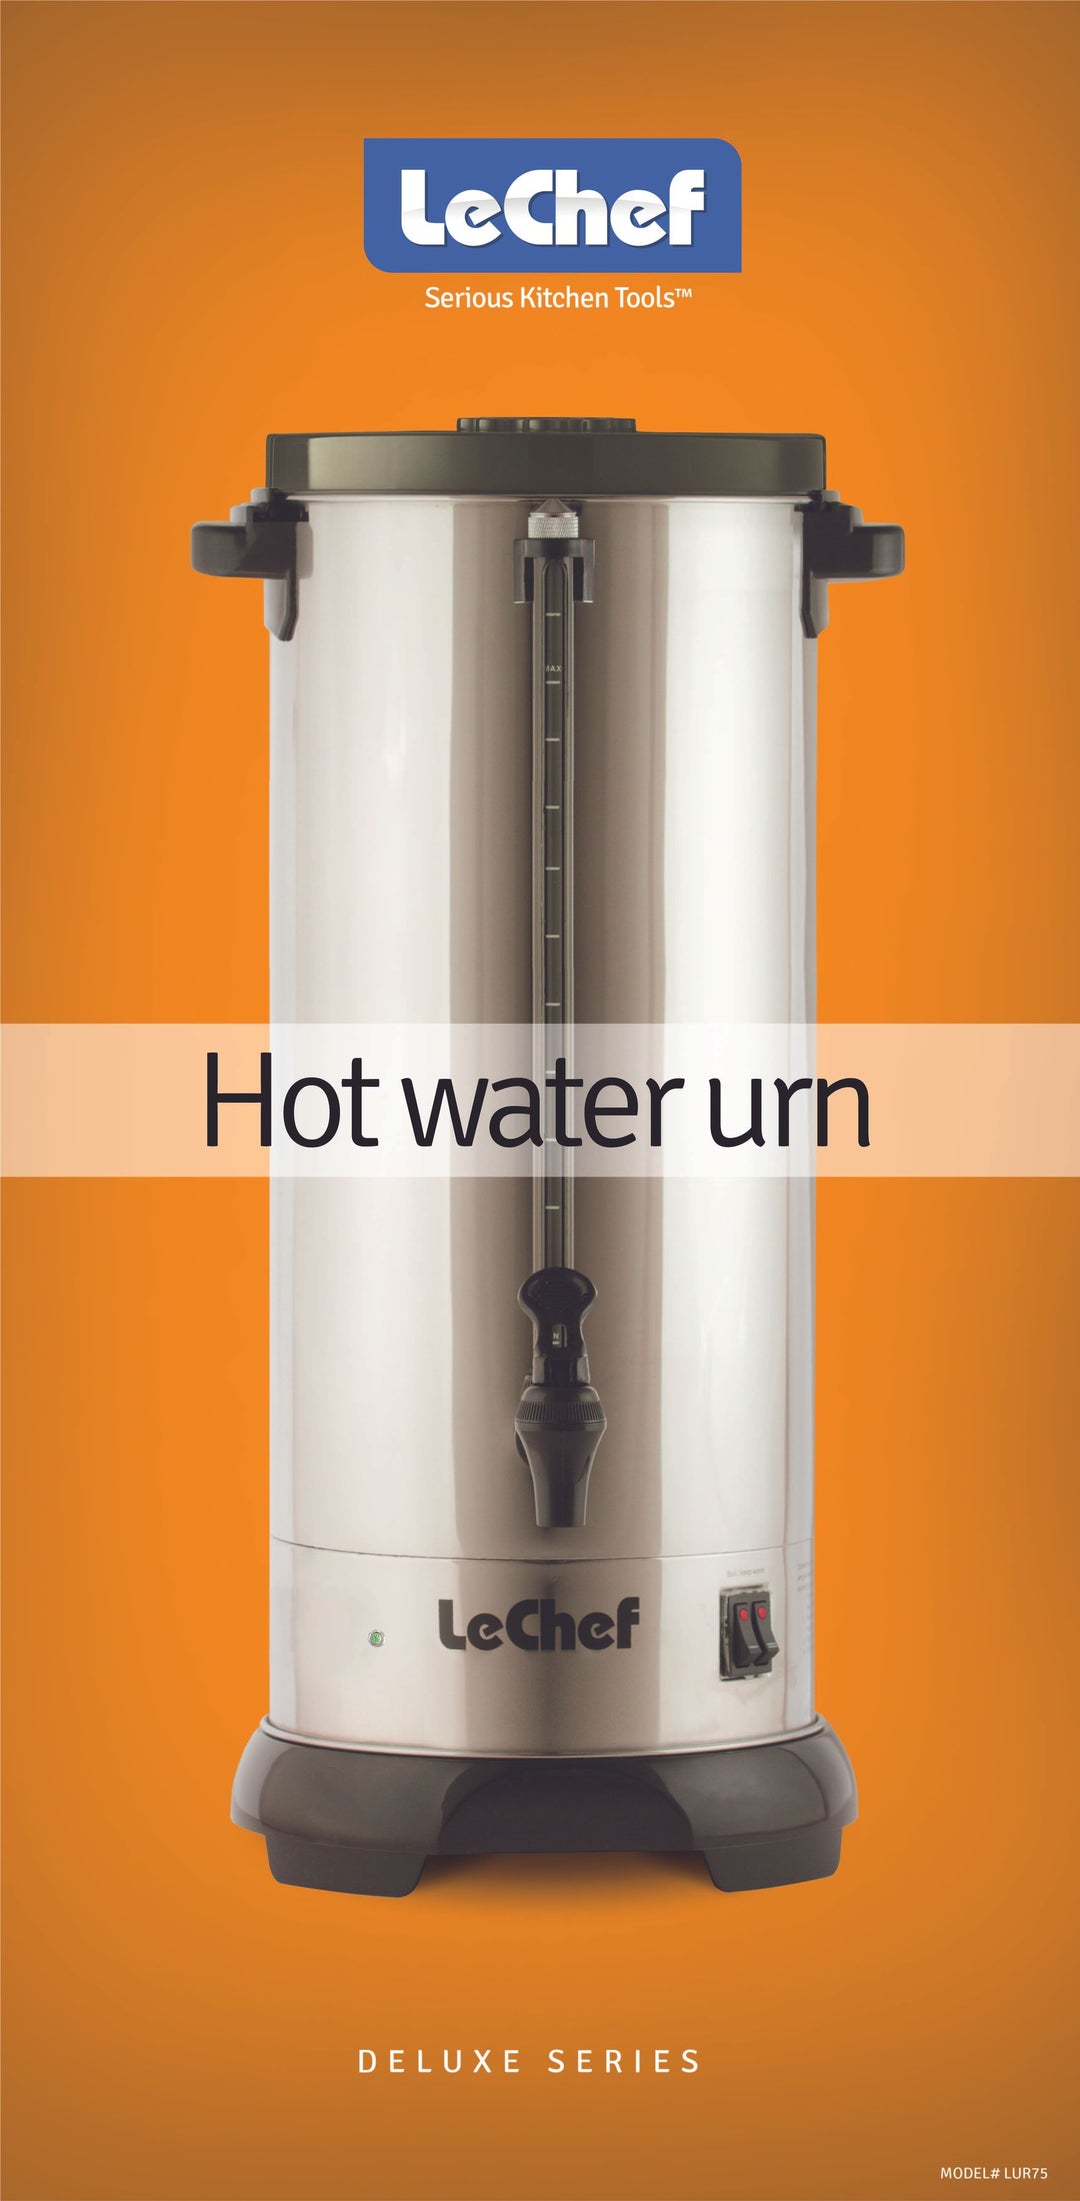 LE'CHEF ELECTRIC HOT WATER URN 75 CUP MODEL# LUR75